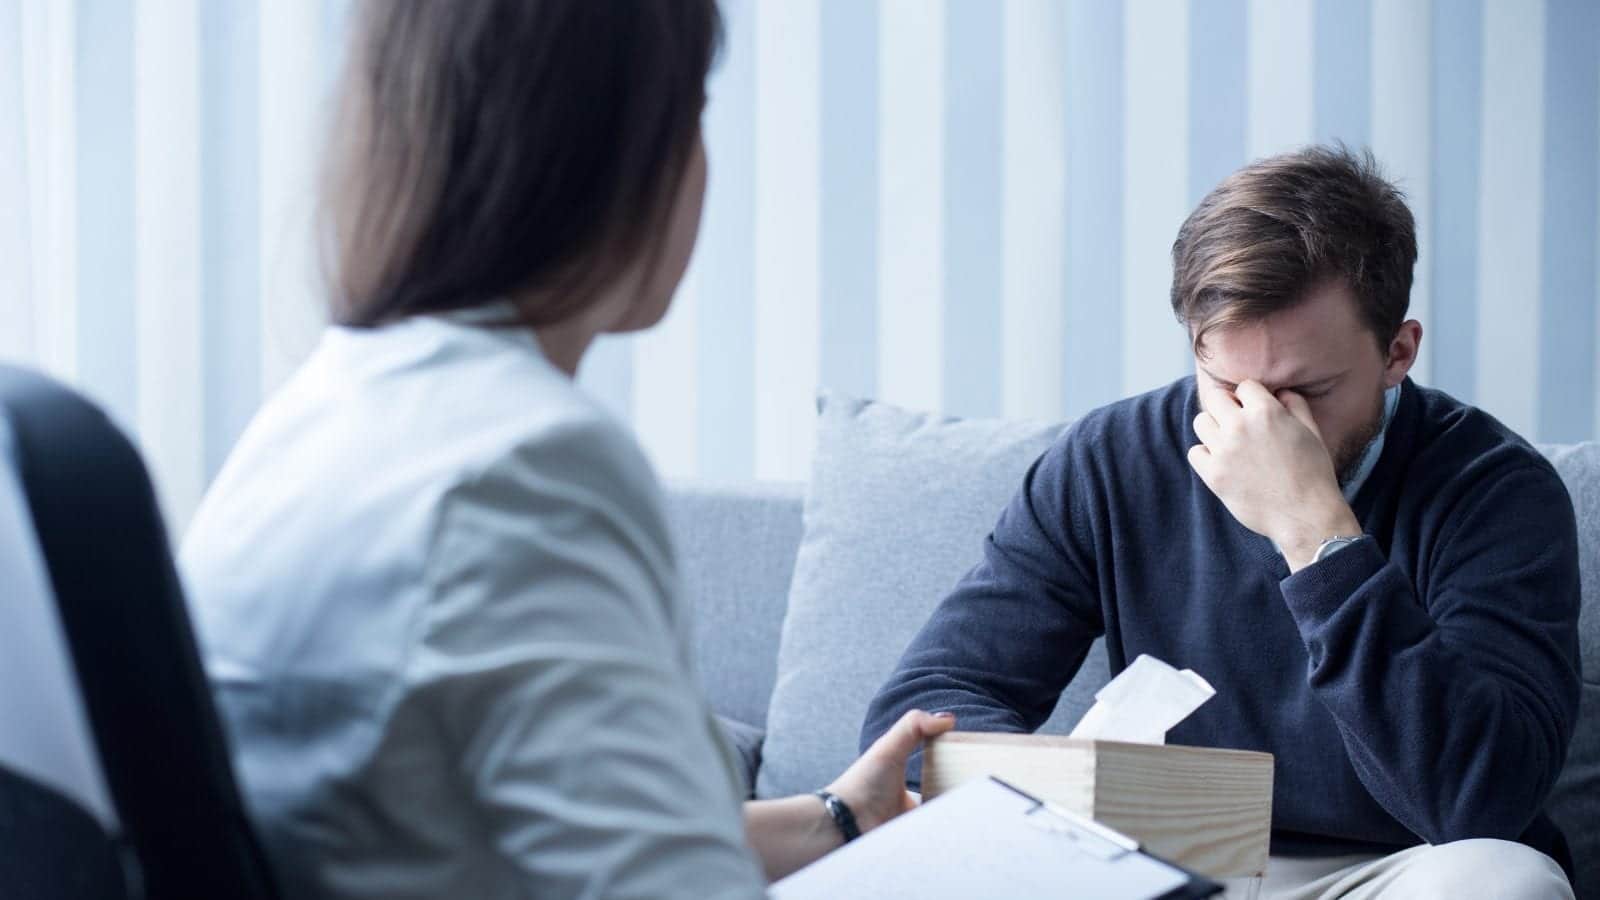 Female Counselor Helping Depressed Man